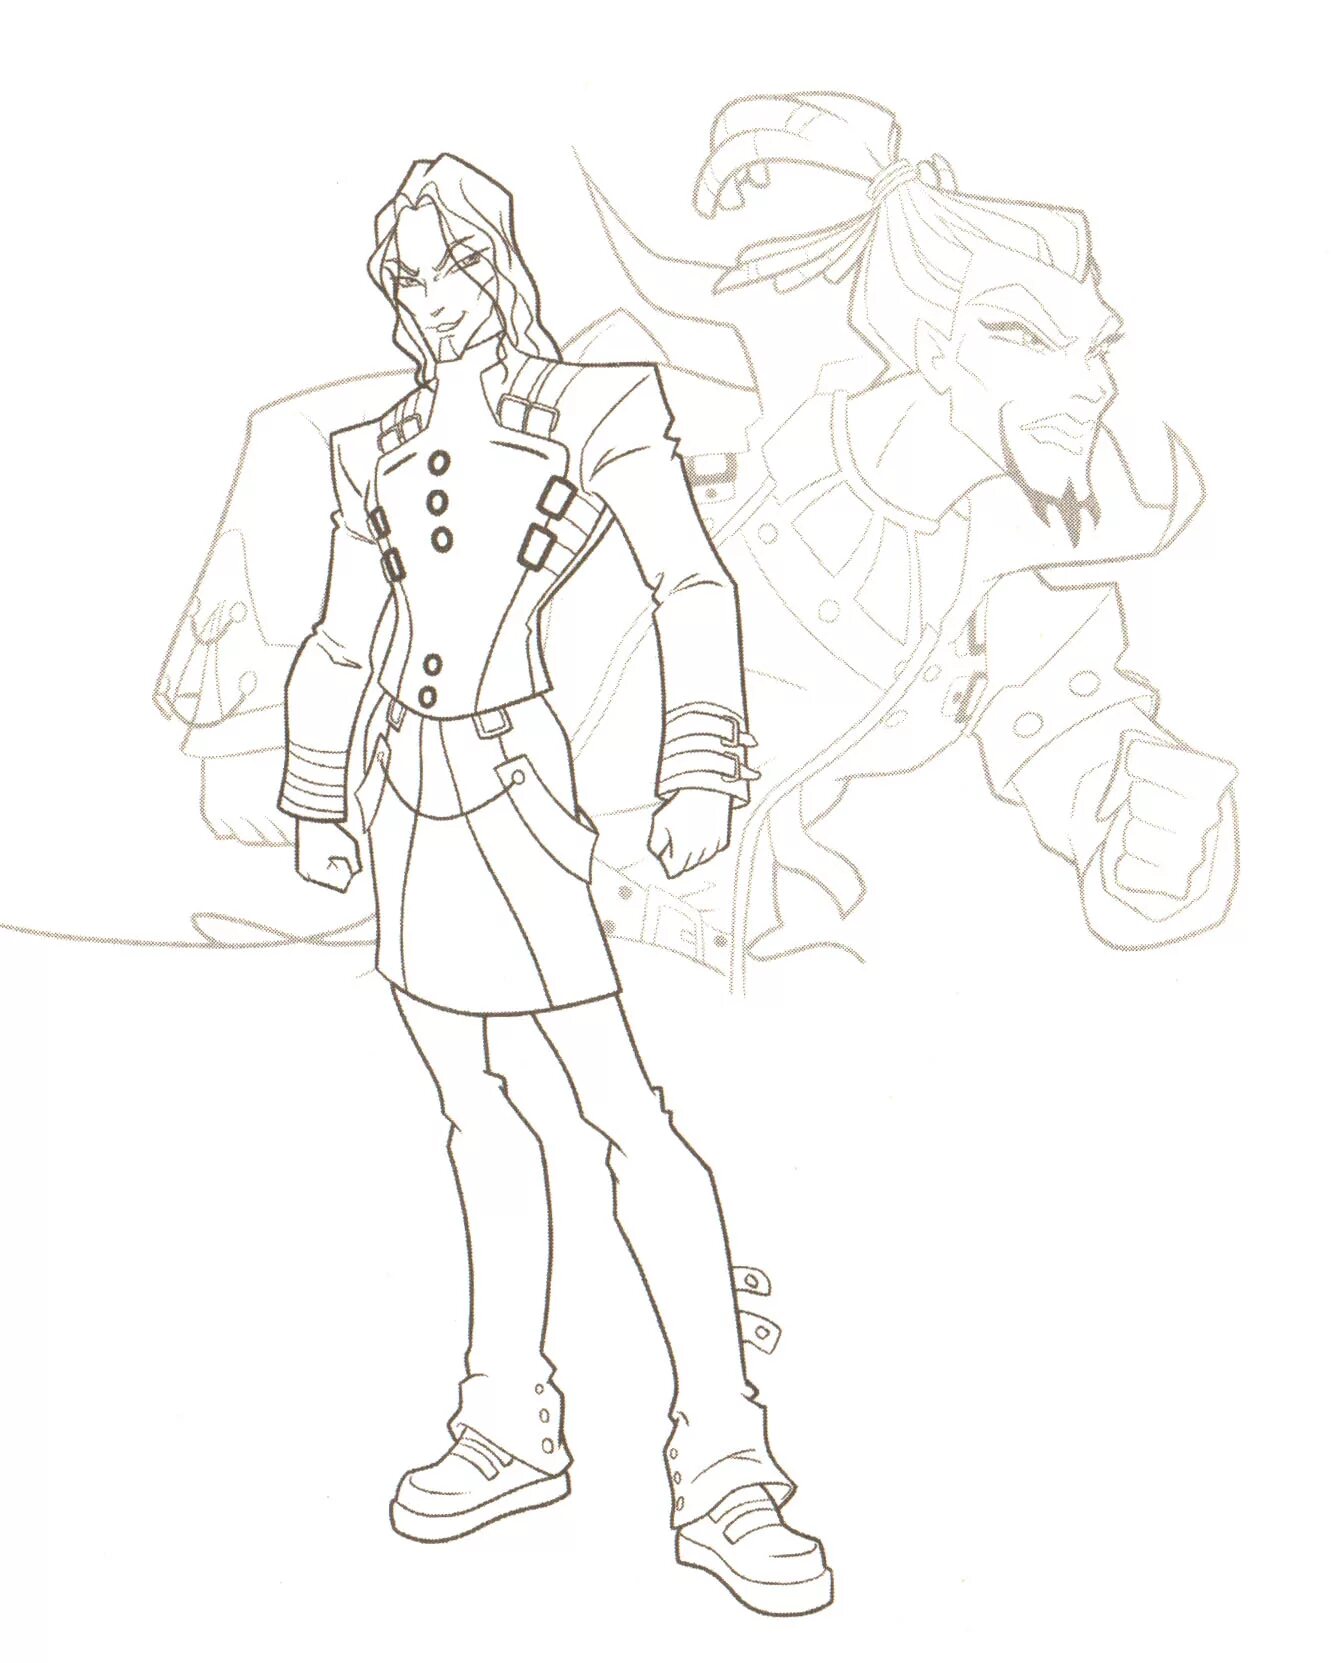 Valtor's animated coloring page